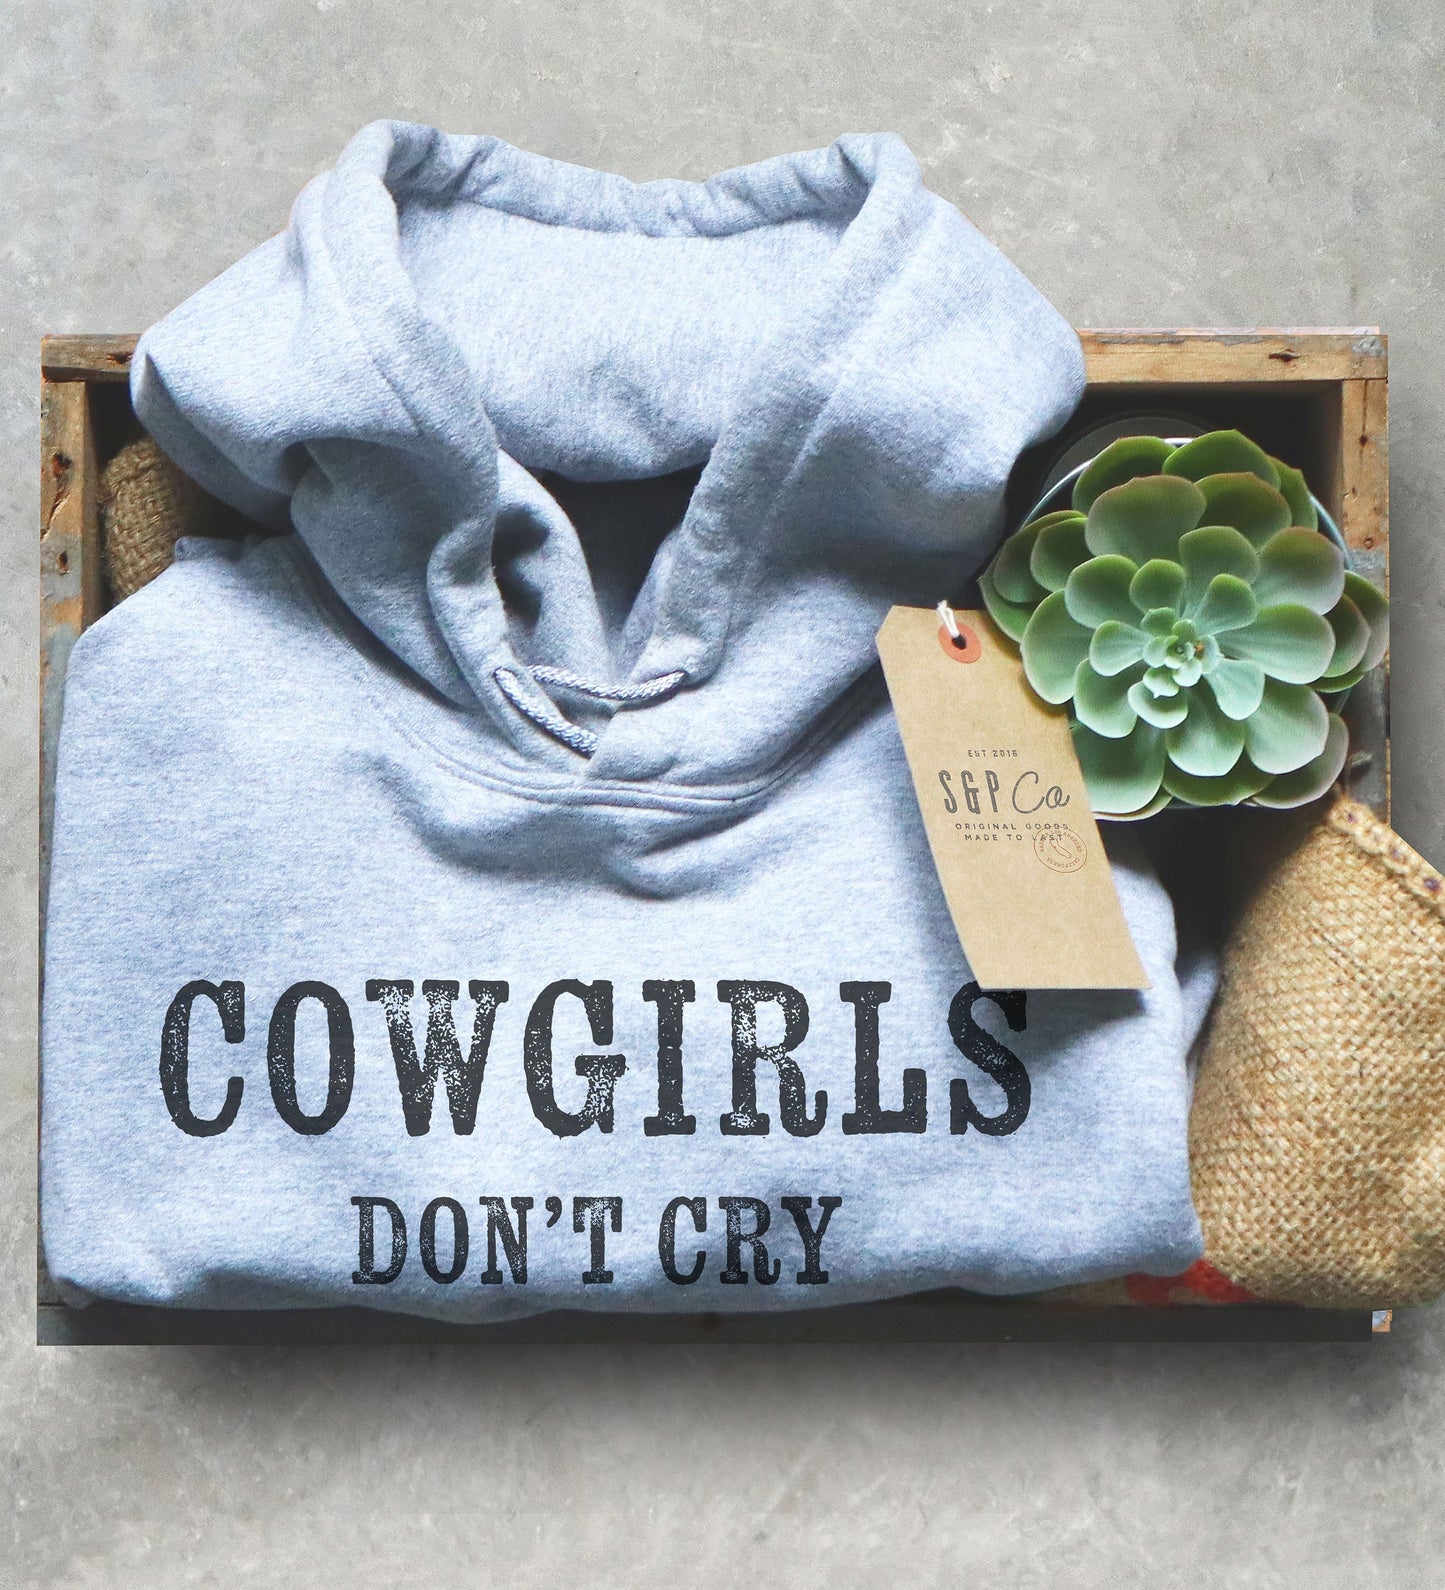 Cowgirls Don't Cry They Reload Hoodie - Country Girl Shirt, Cowgirl Shirts, Cowgirl Outfit, Rodeo Shirt, Western Shirt, Cowgirl TeeShirt